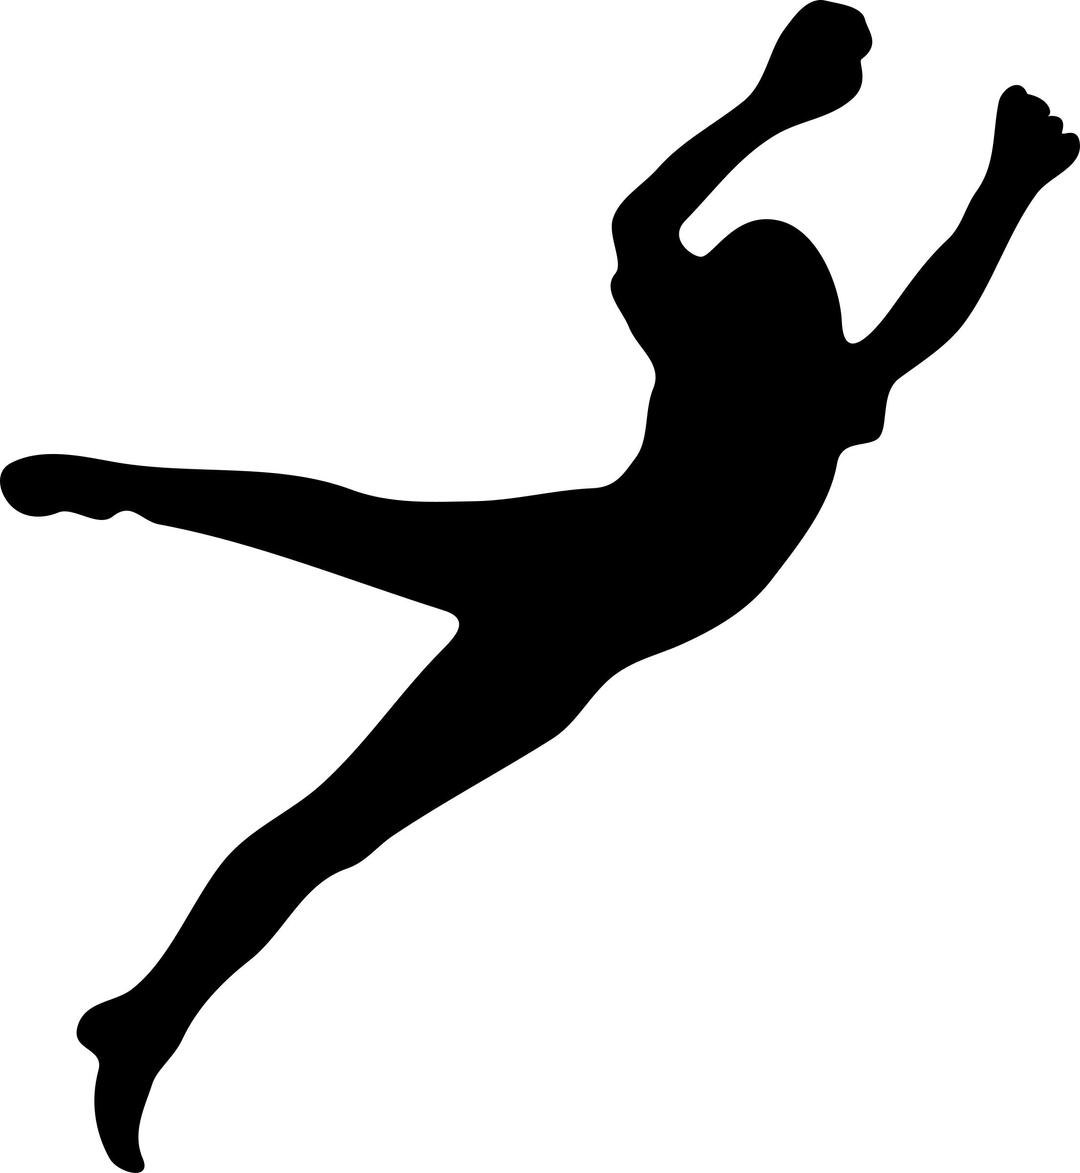 Goalkeeper silhouette png transparent